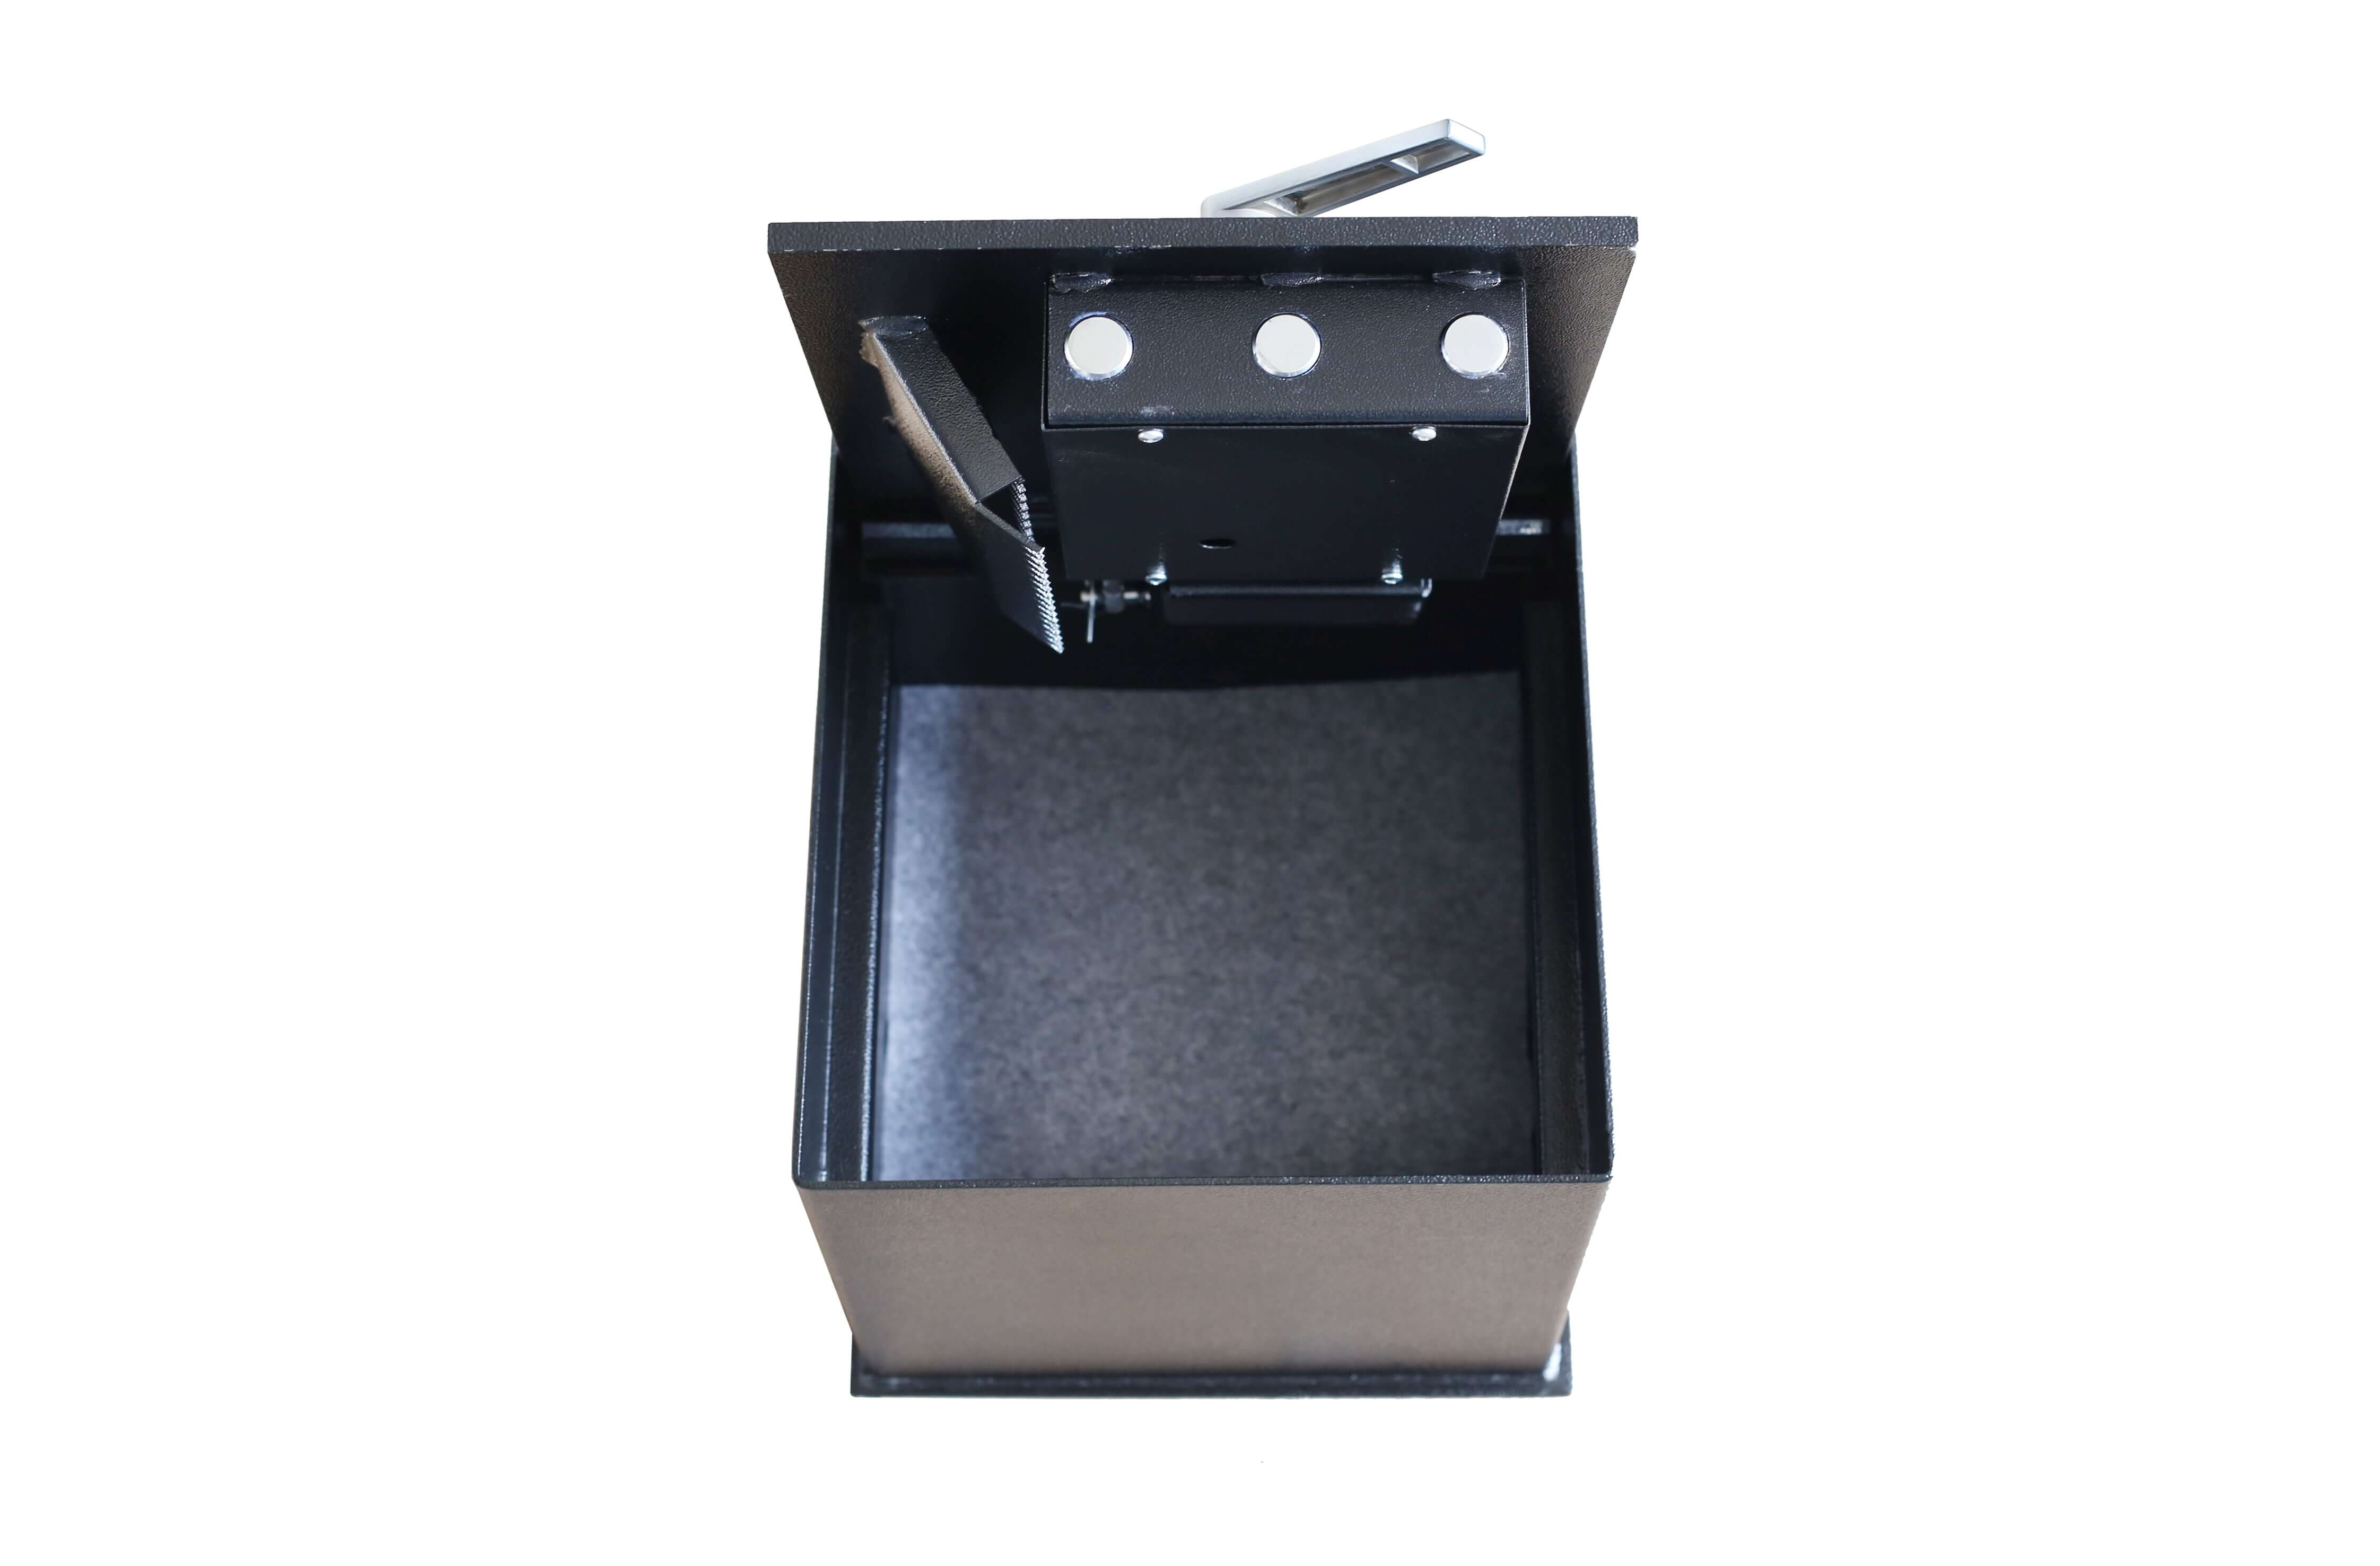 In-Floor Concealed Depository Drop Safe with UL Listed Combination Dial Lock, T870